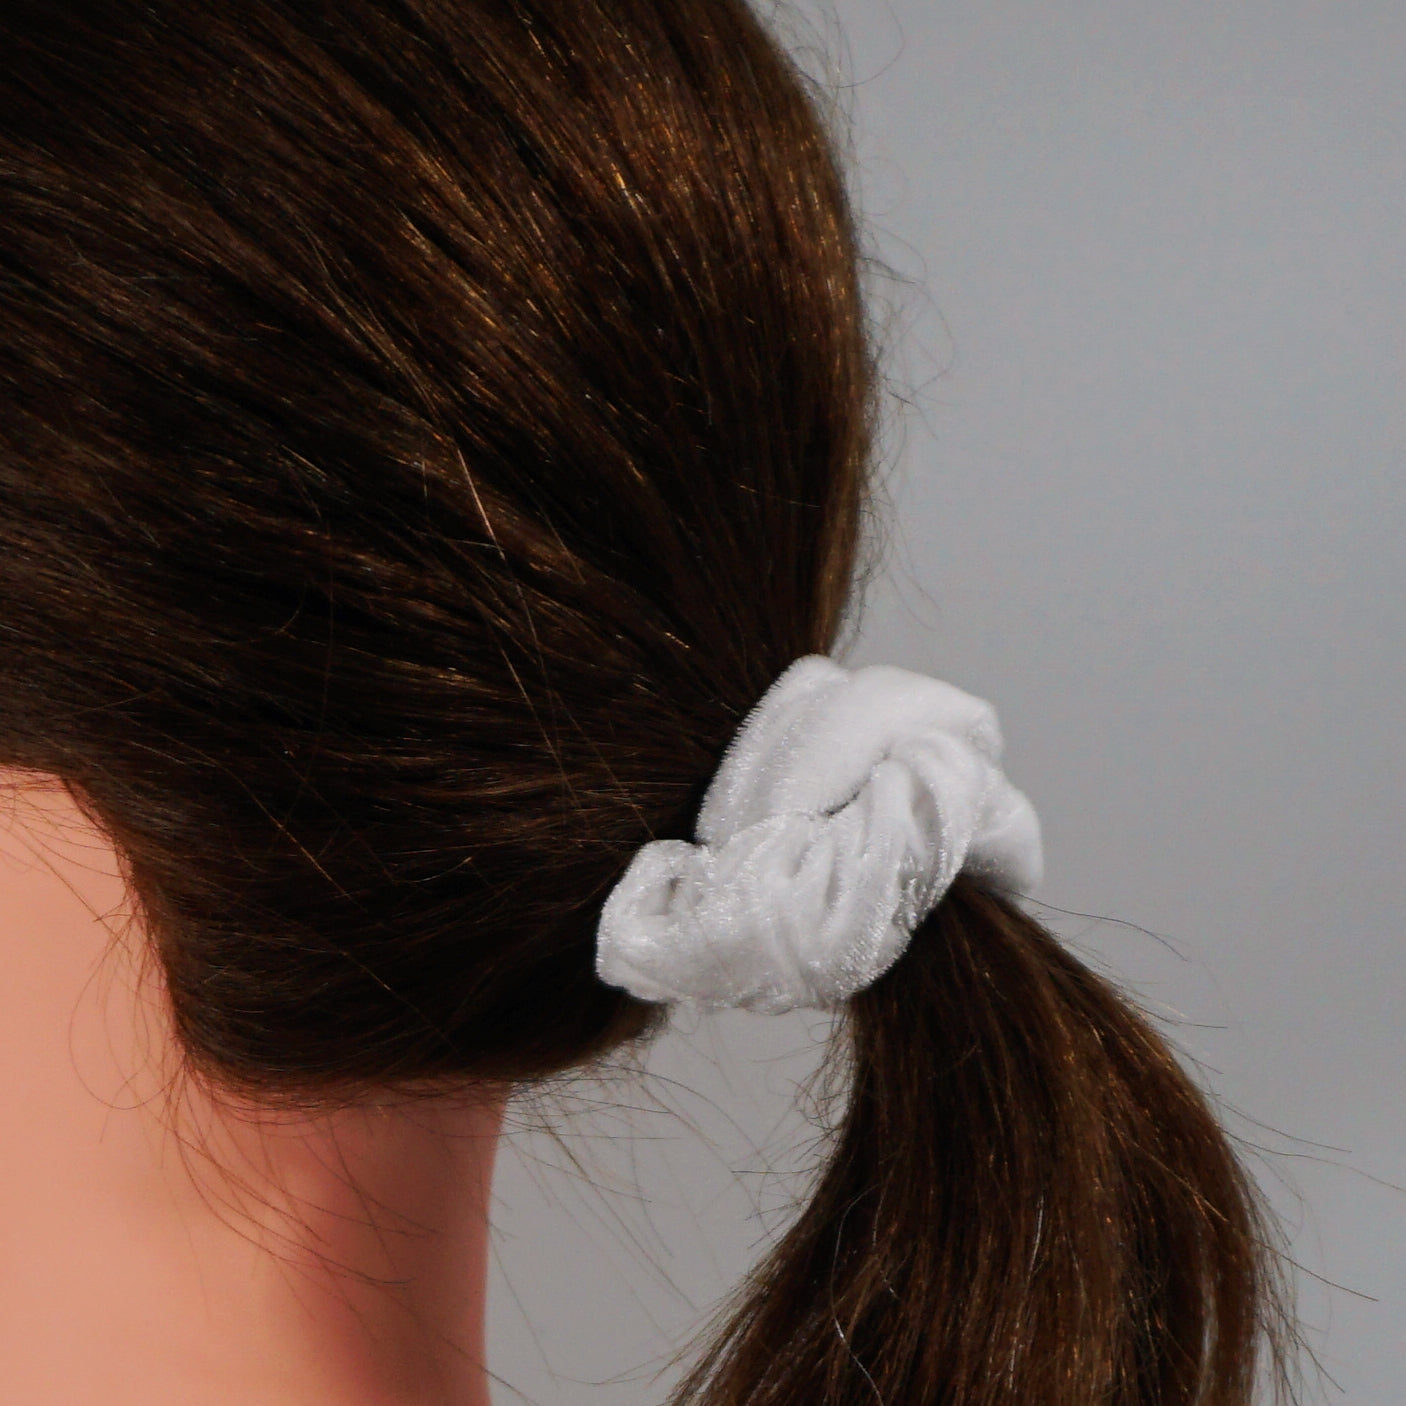 Amelia Beauty Products, White Velvet Velvet Scrunchies, 3.5in Diameter, Gentle on Hair, Strong Hold, No Snag, No Dents or Creases. 8 Pack